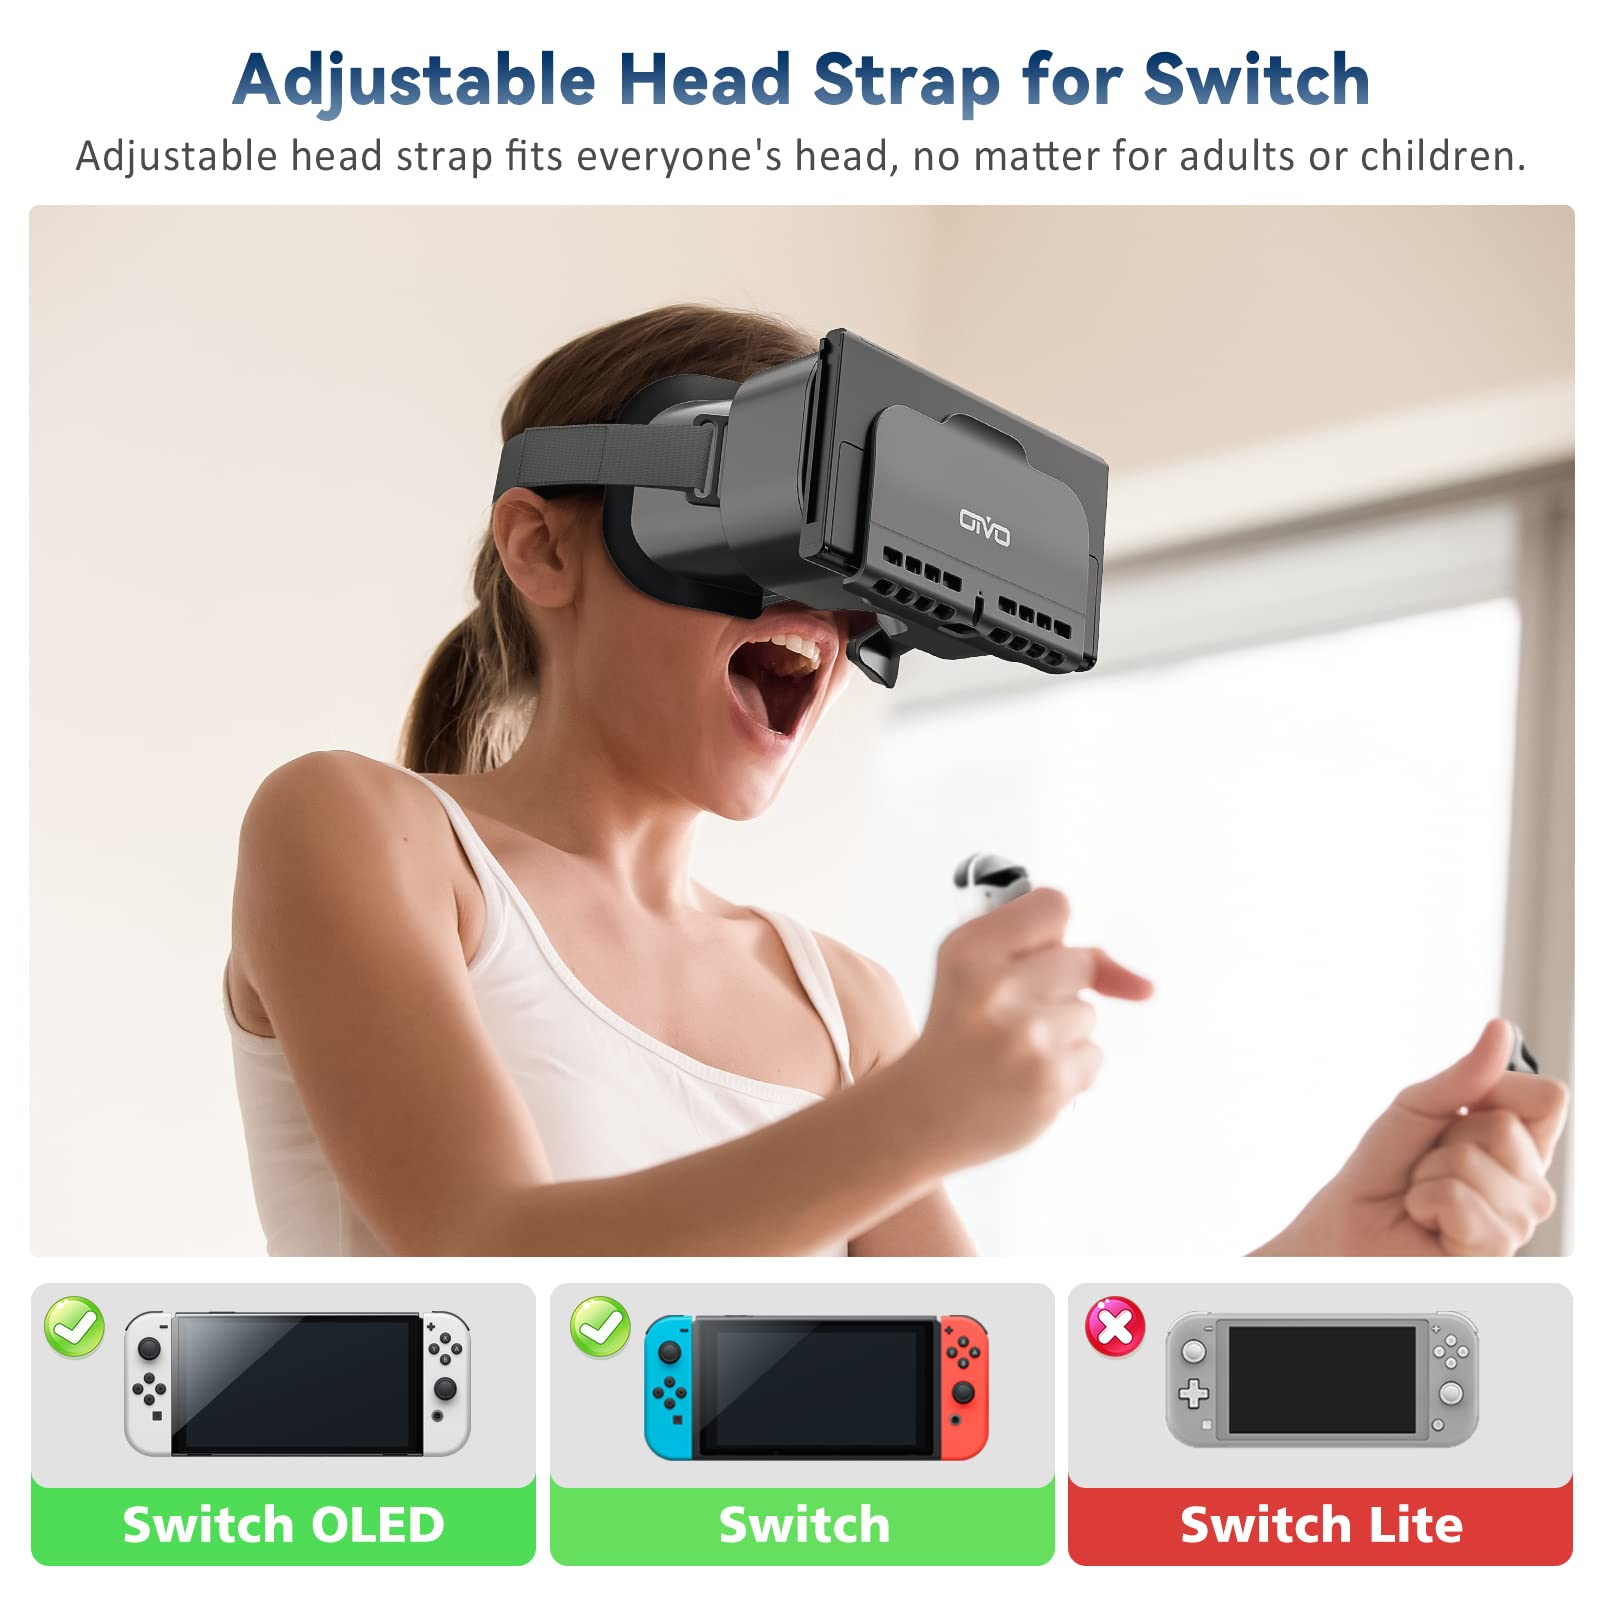 VR Headset Replacement for Nintendo Switch & Nintendo Switch OLED, VR Switch Headset with 3D High-Definition Virtual Reality Glasses, VR Goggles Compatible with Nintendo Switch & OLED Version